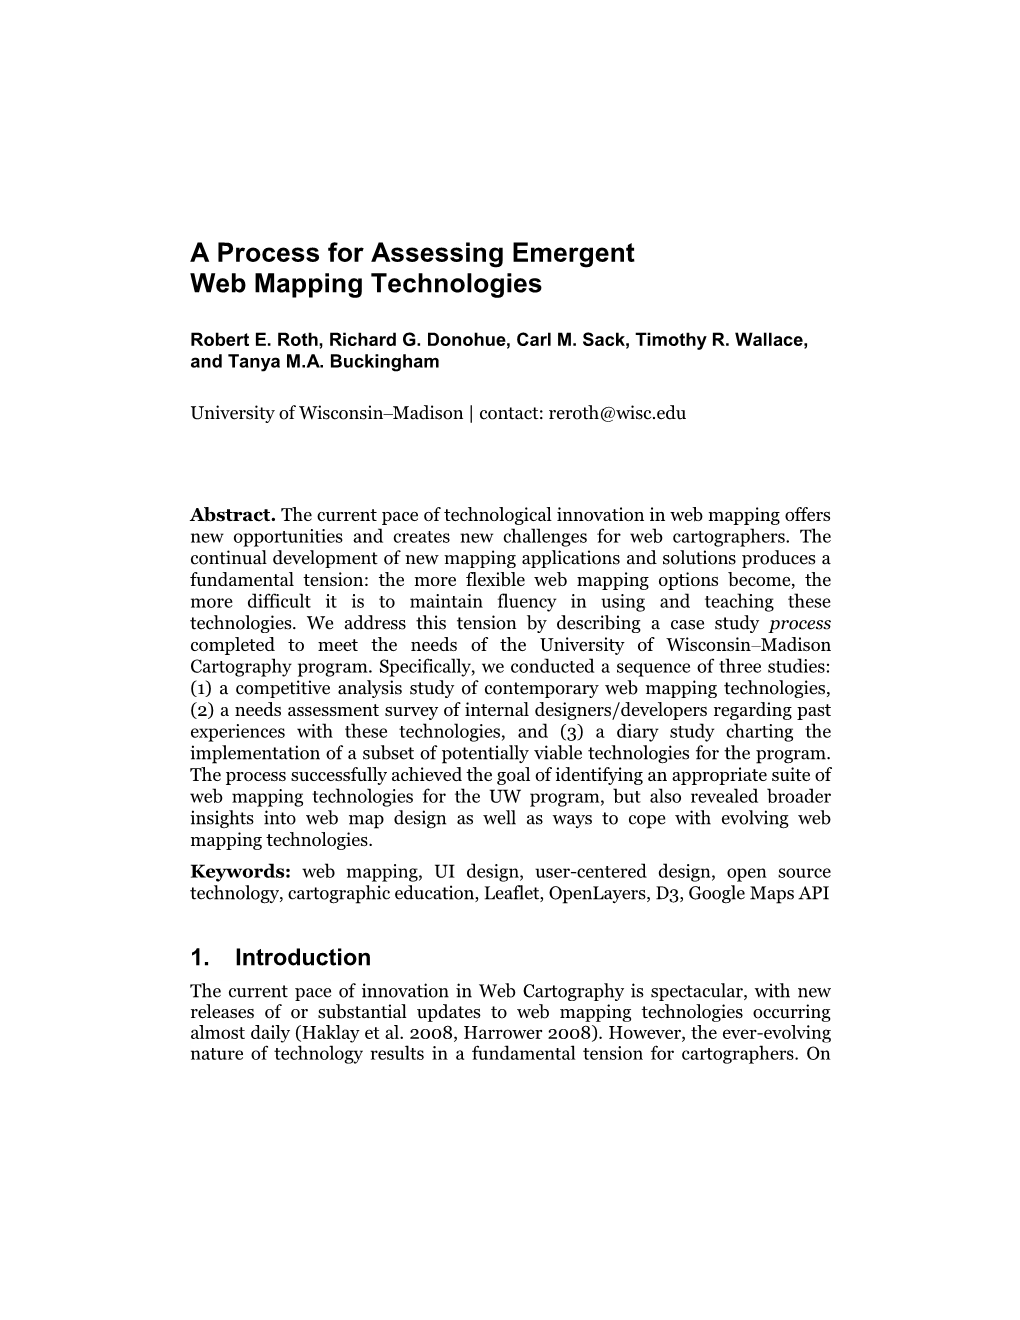 A Process for Assessing Emergent Web Mapping Technologies